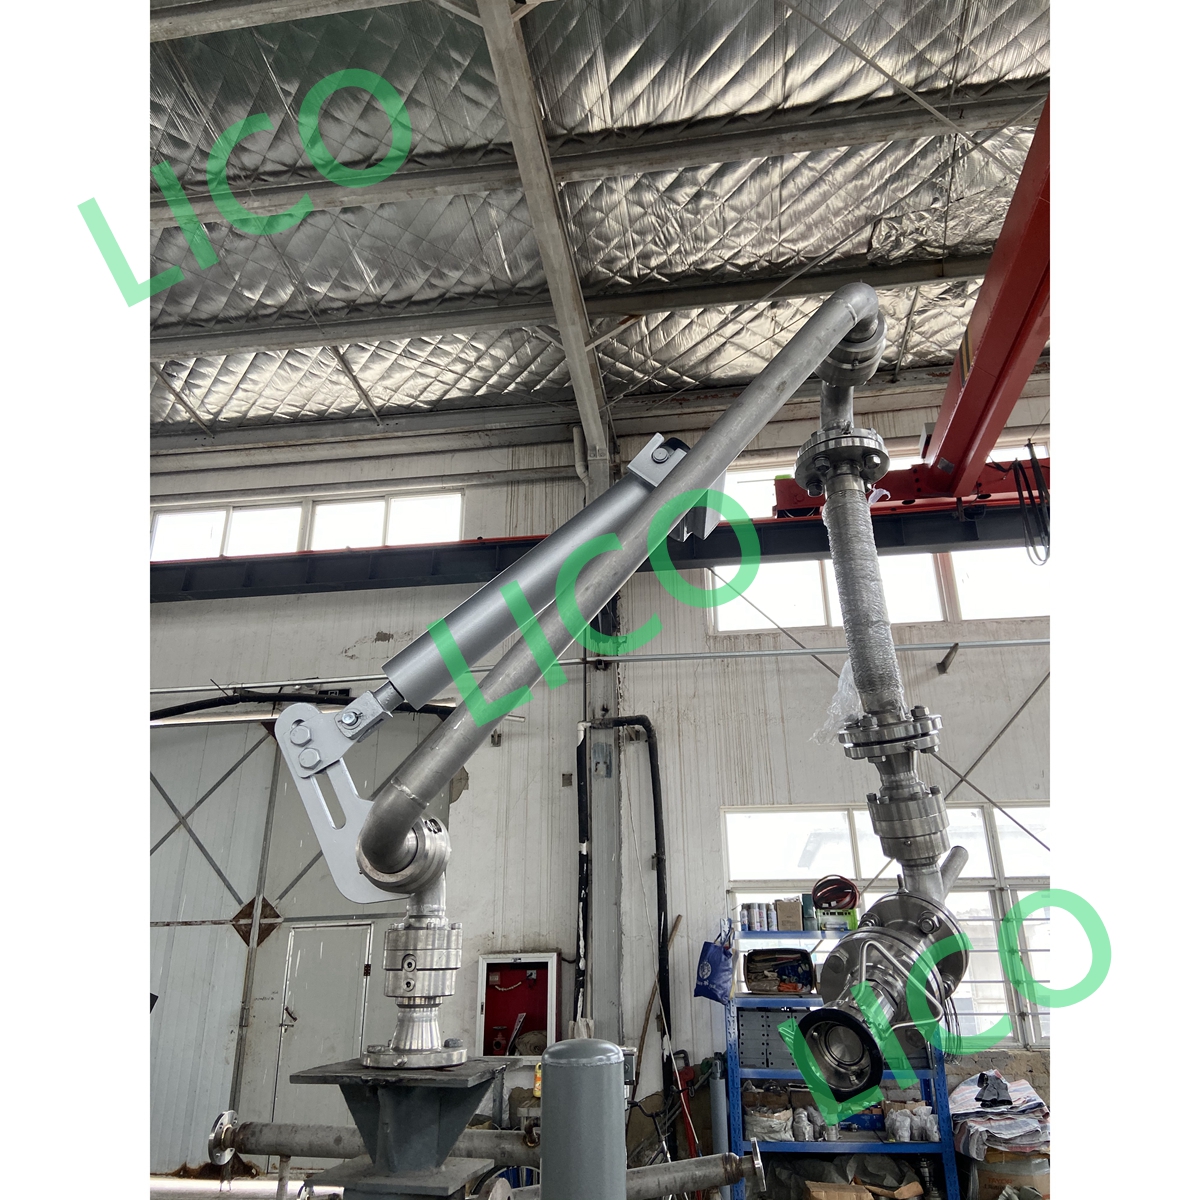 Petroleum Industrial Top Loading Arm for Railway Loading